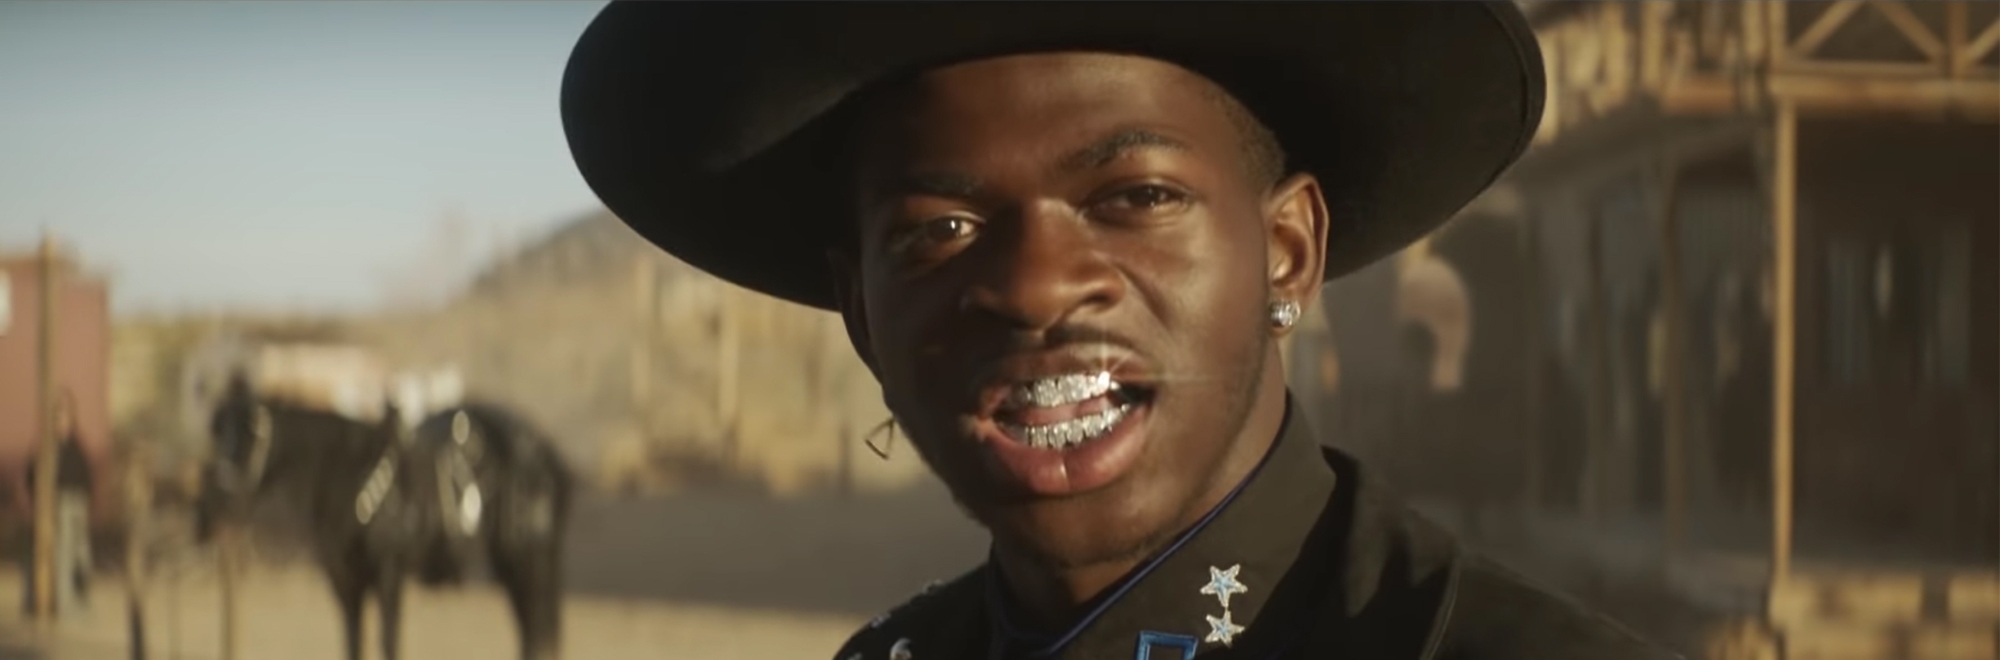 Lil Nas X has a dance off to Old Town Road with Sam Elliott in hilarious Doritos Super Bowl ad